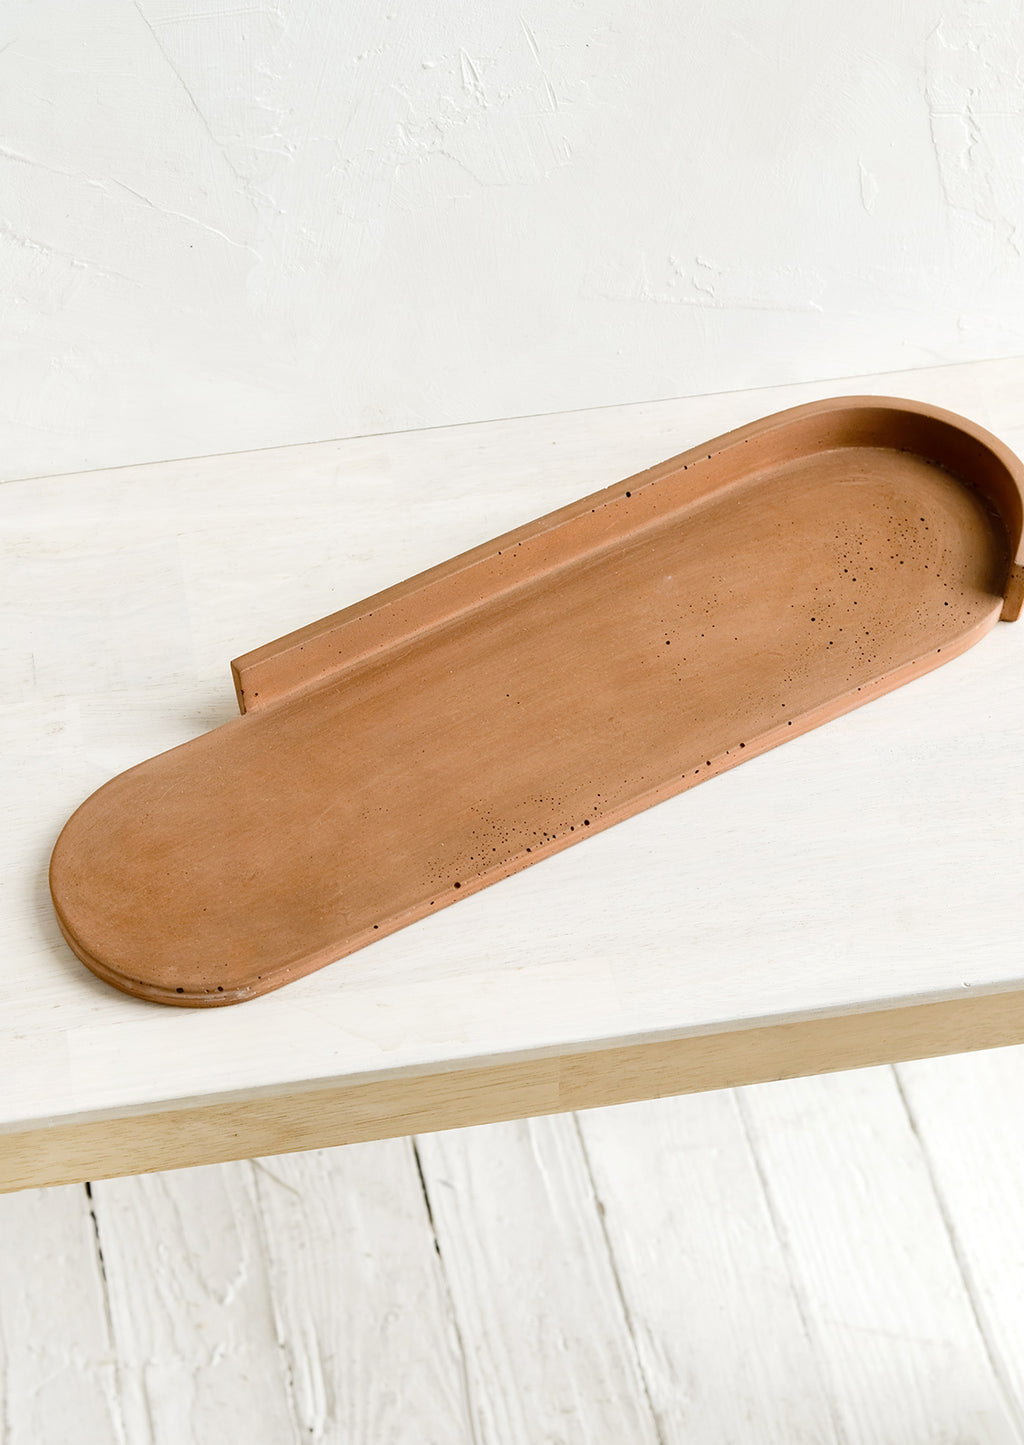 Ore: An elongated oval shaped platter made from rust colored concrete.